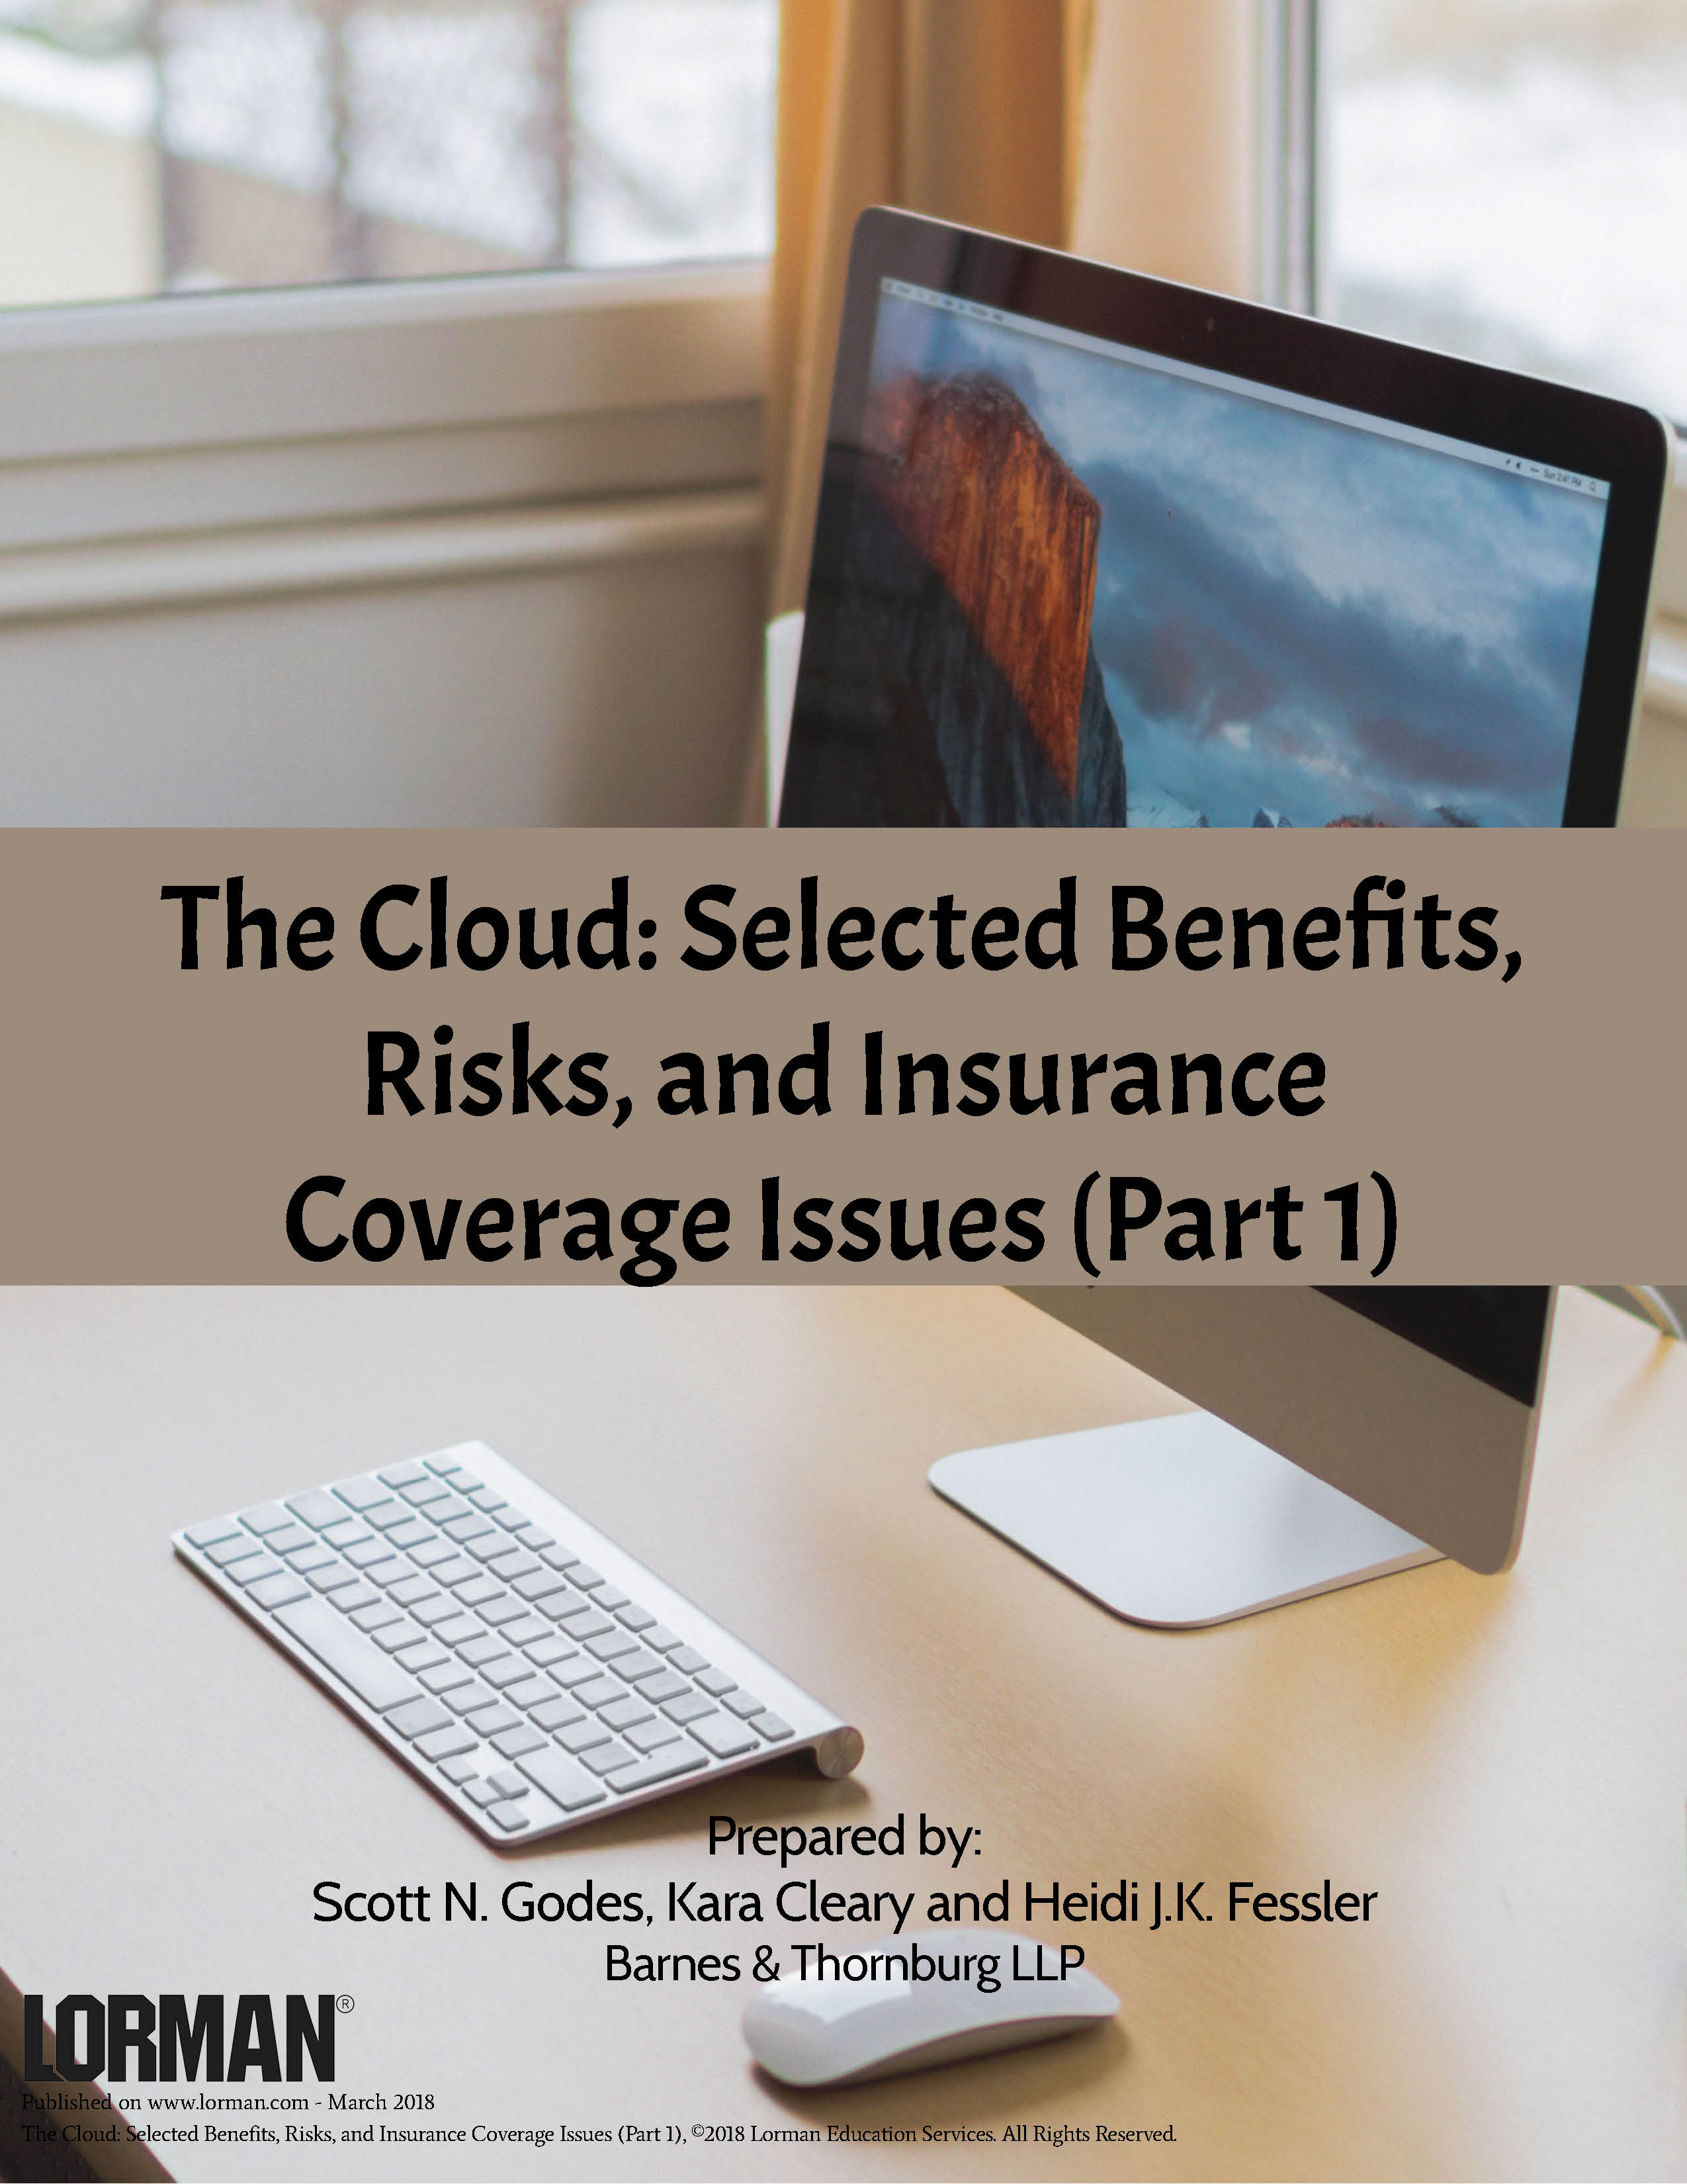 The Cloud: Selected Benefits, Risks, and Insurance Coverage Issues (Part 1)